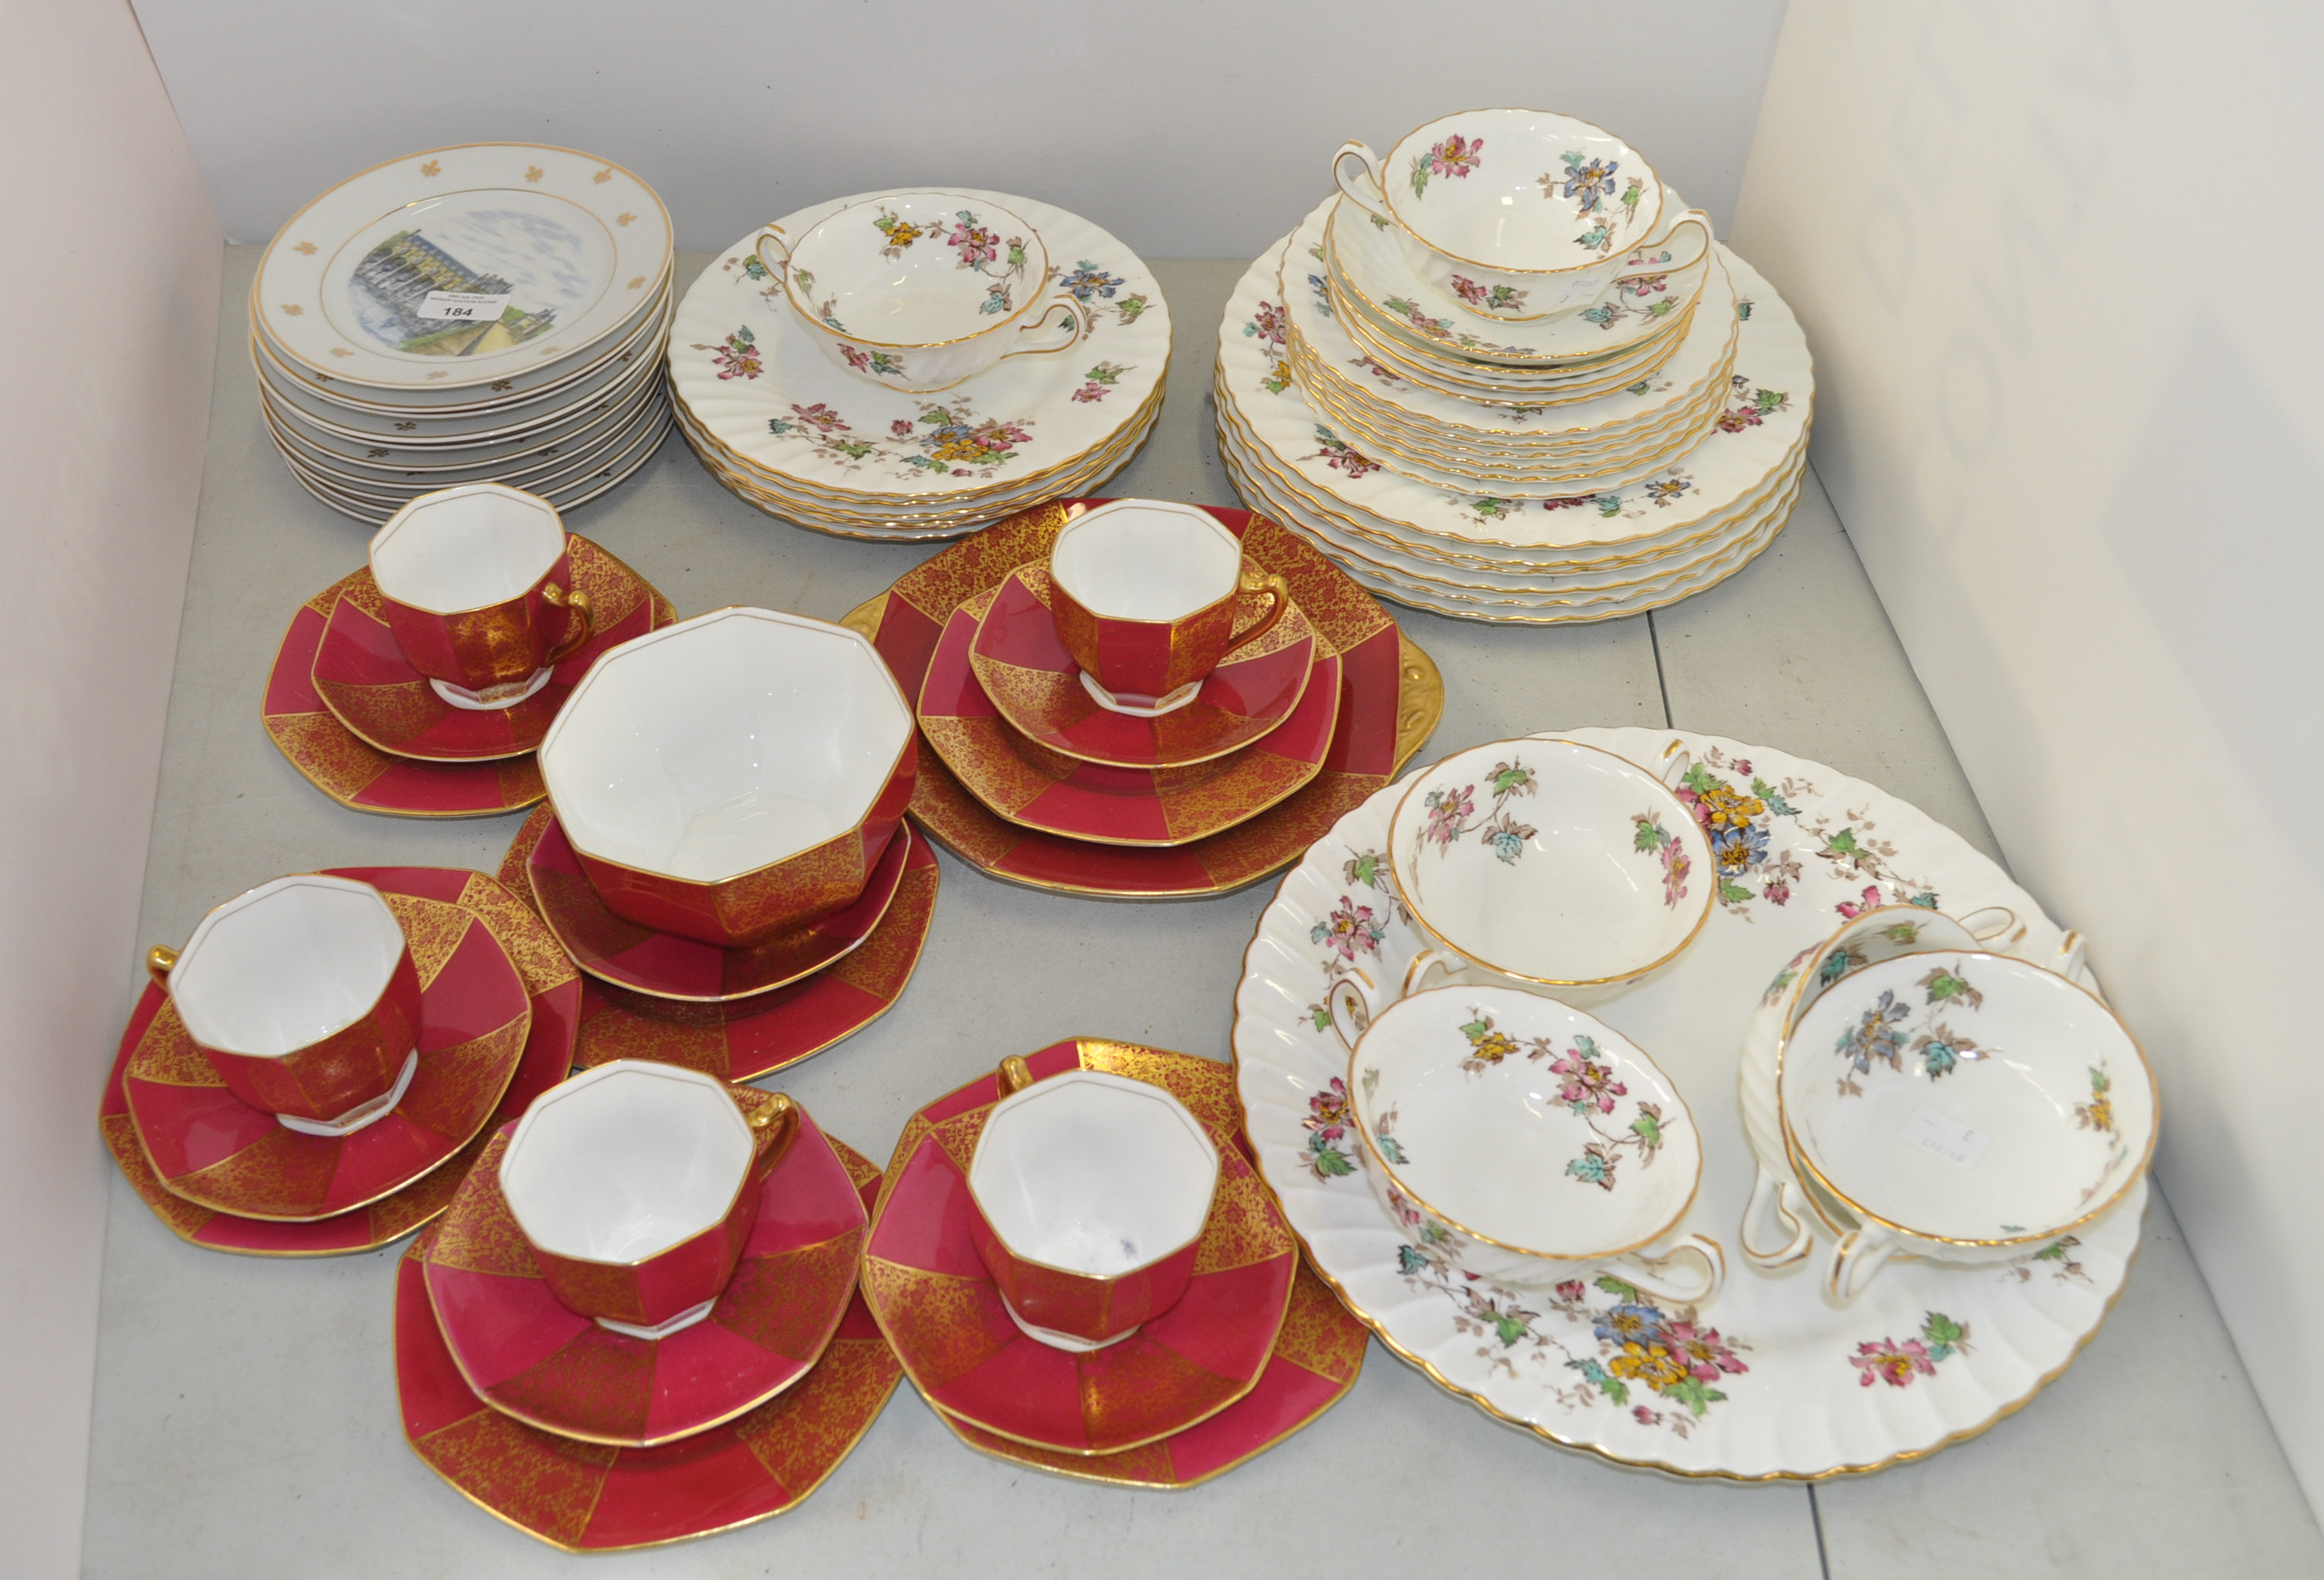 A 'Vermont' dinner service and other items - Image 2 of 2